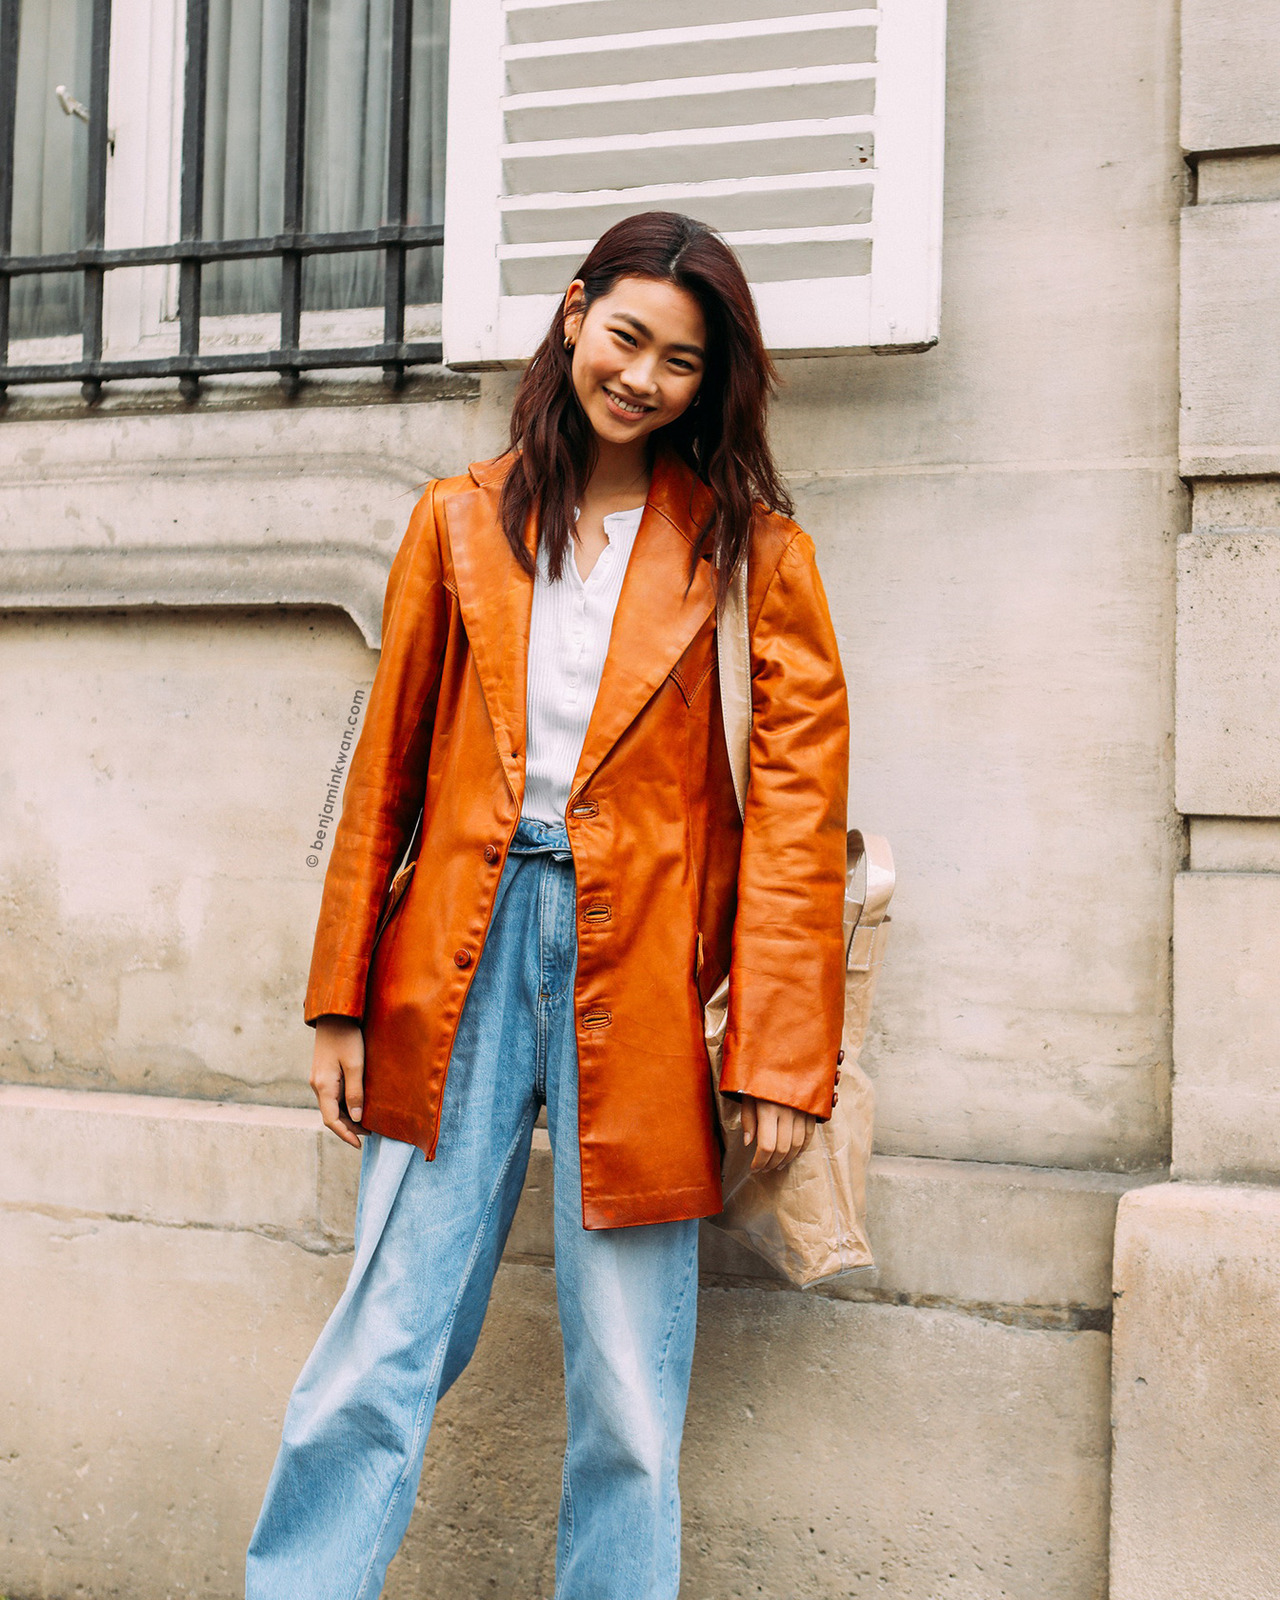 Street style, model HoYeon Jung after Y3 Fall-Winter 2018-2019